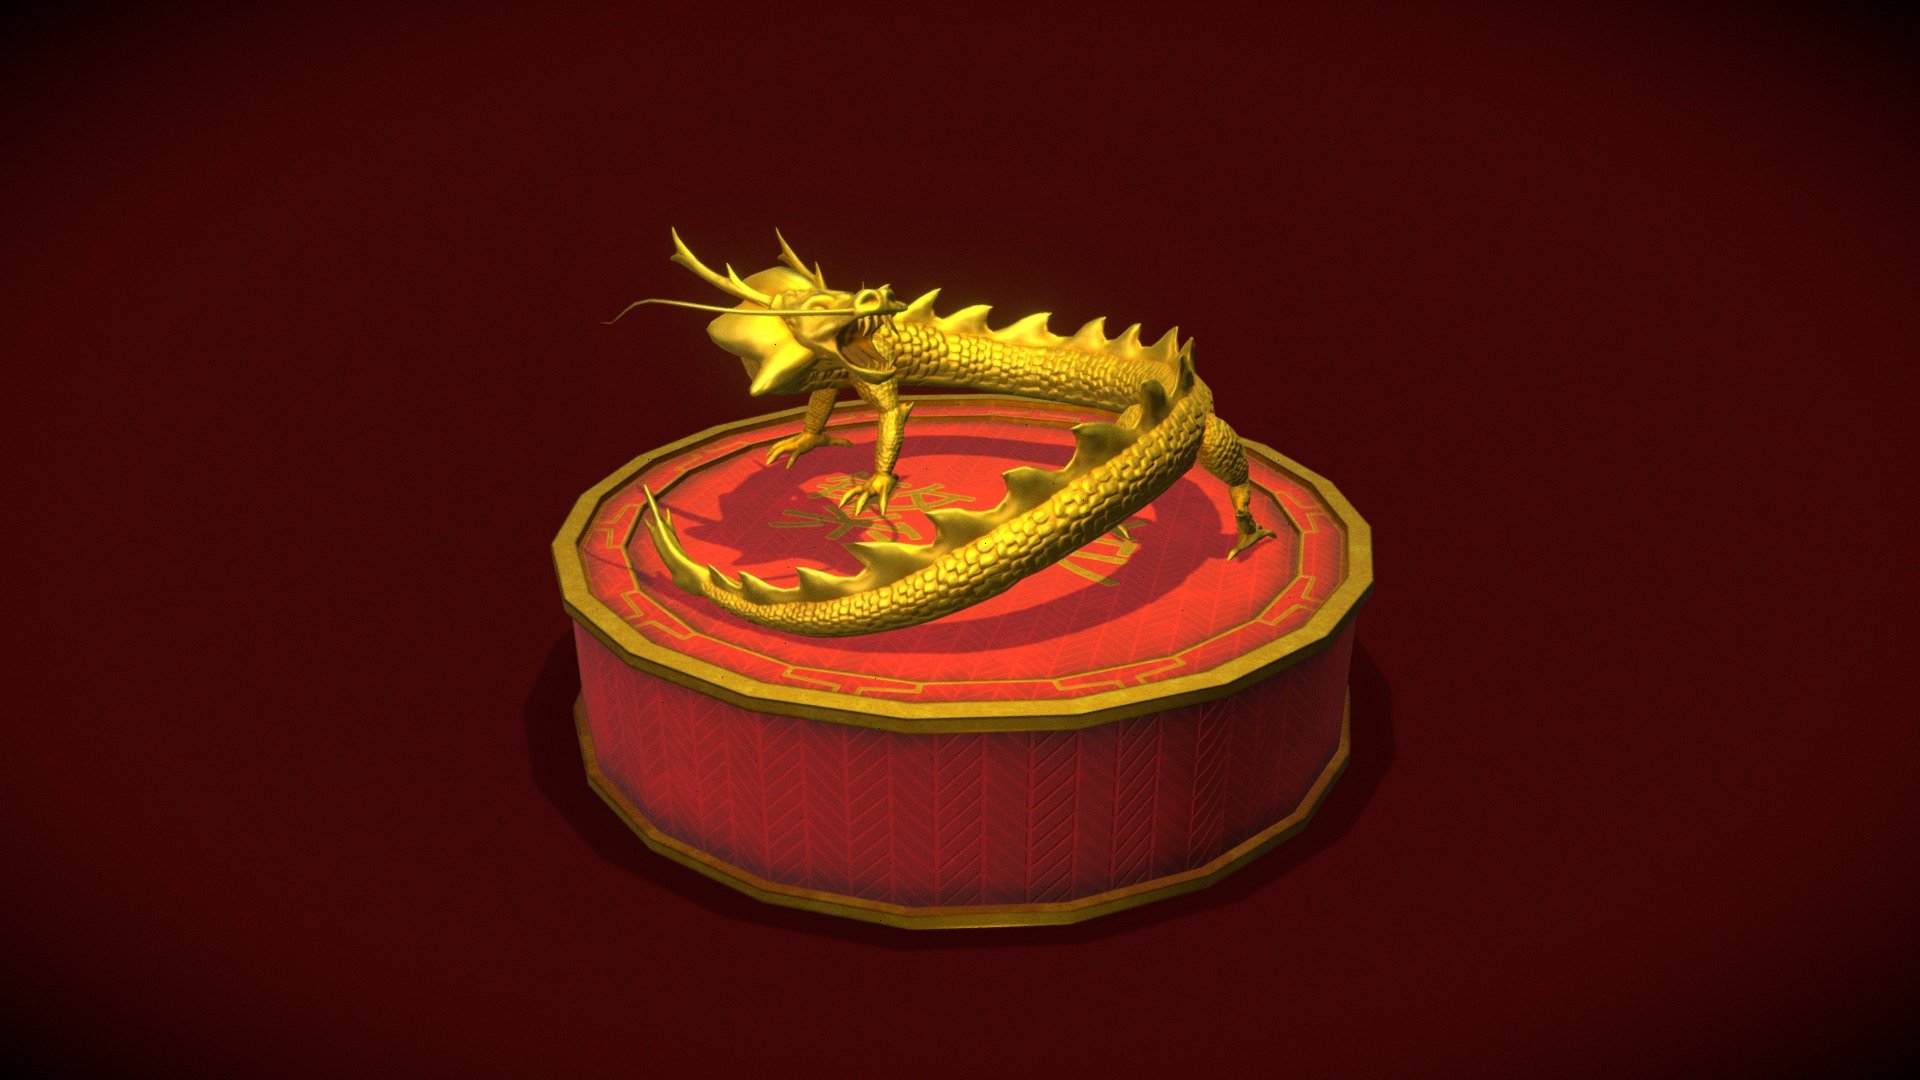 Ready for a year of prosperity?

Take a look at it’s Youtube video

~ This model contains:




Chinese Golden Dragon in Pedestal FBX File

Chinese Golden Dragon FBX File

Chinese Pedestal FBX File

4096x4096 Separated Textures

Six Renders (PNG Files)

-----------------------------------------------------------------------------

~ Details of the model:





The model have a reduced number of polygons for performance.




4096x4096 Materials (Dragon and Pedestal have separated textures)




6 renders are in PNG format with background



-----------------------------------------------------------------------------

Consider to support me just visiting my social media, it helps me a lot! https://bento.me/asgart


                                                        ~ Asgart
 - Golden Dragon - Lunar Year 2024 - Buy Royalty Free 3D model by Asgart 3d model